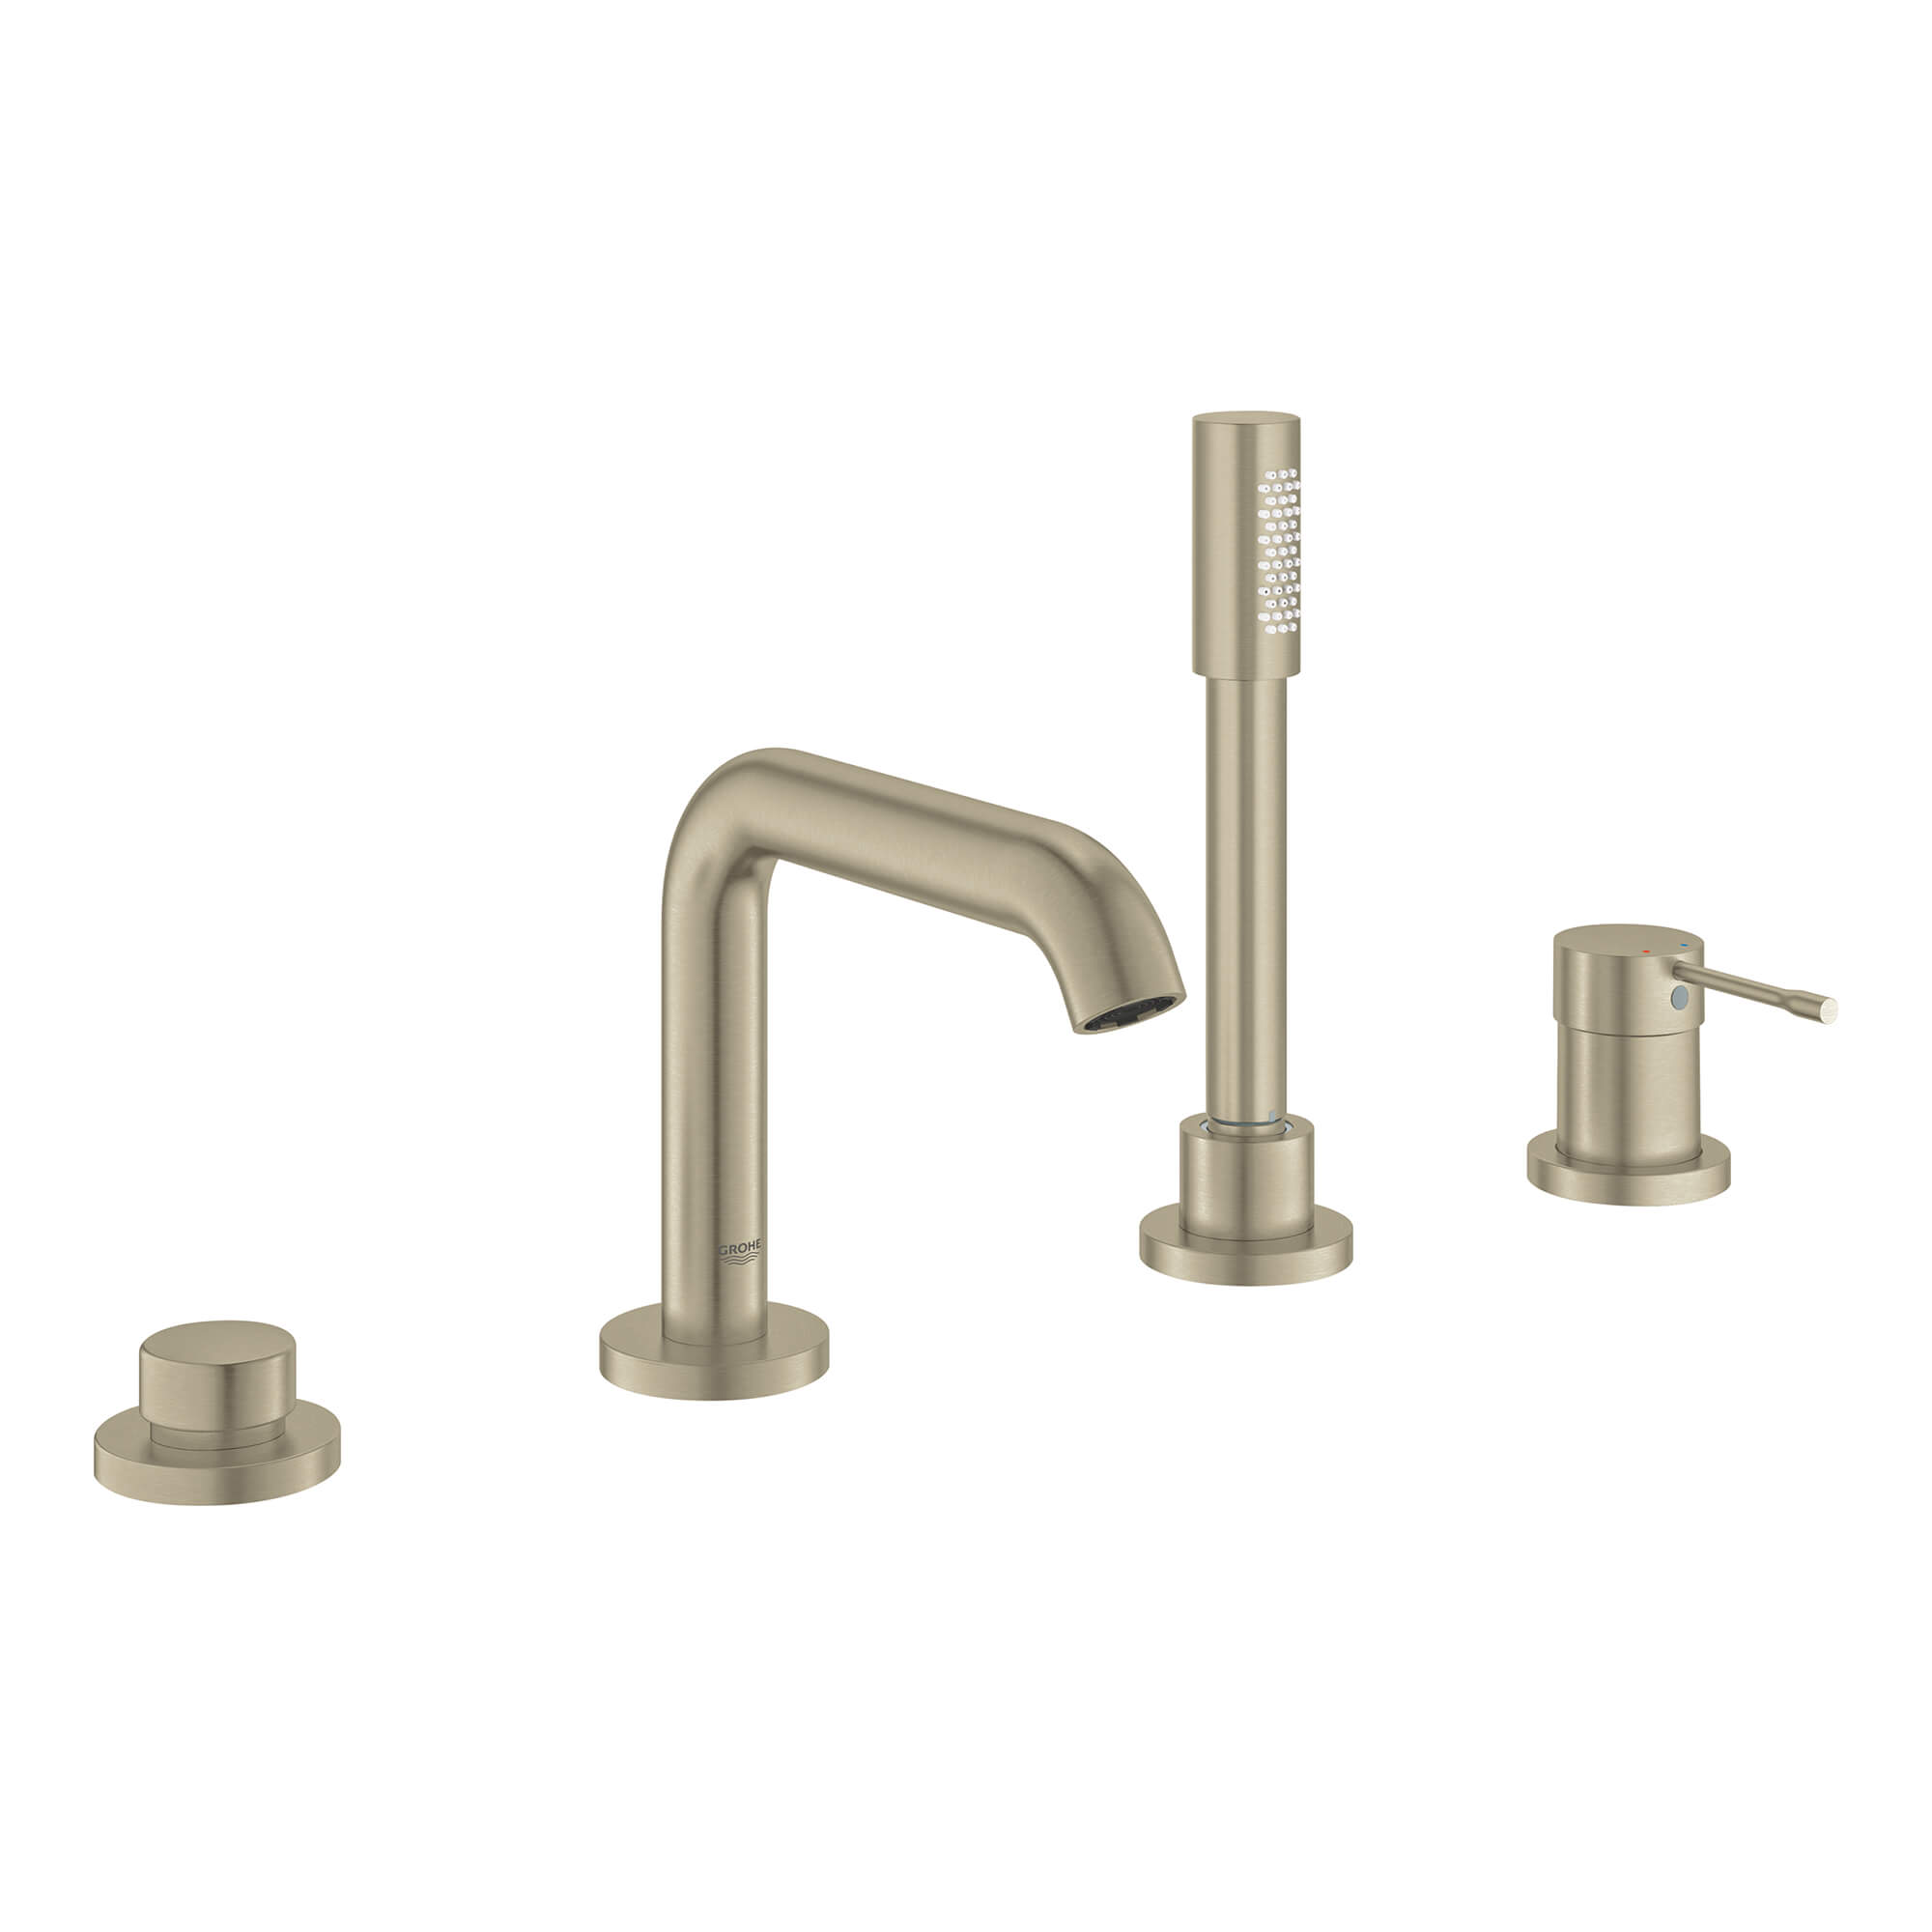 4-Hole Single-Handle Deck Mount Roman Tub Faucet with 2.0 GPM Hand Shower